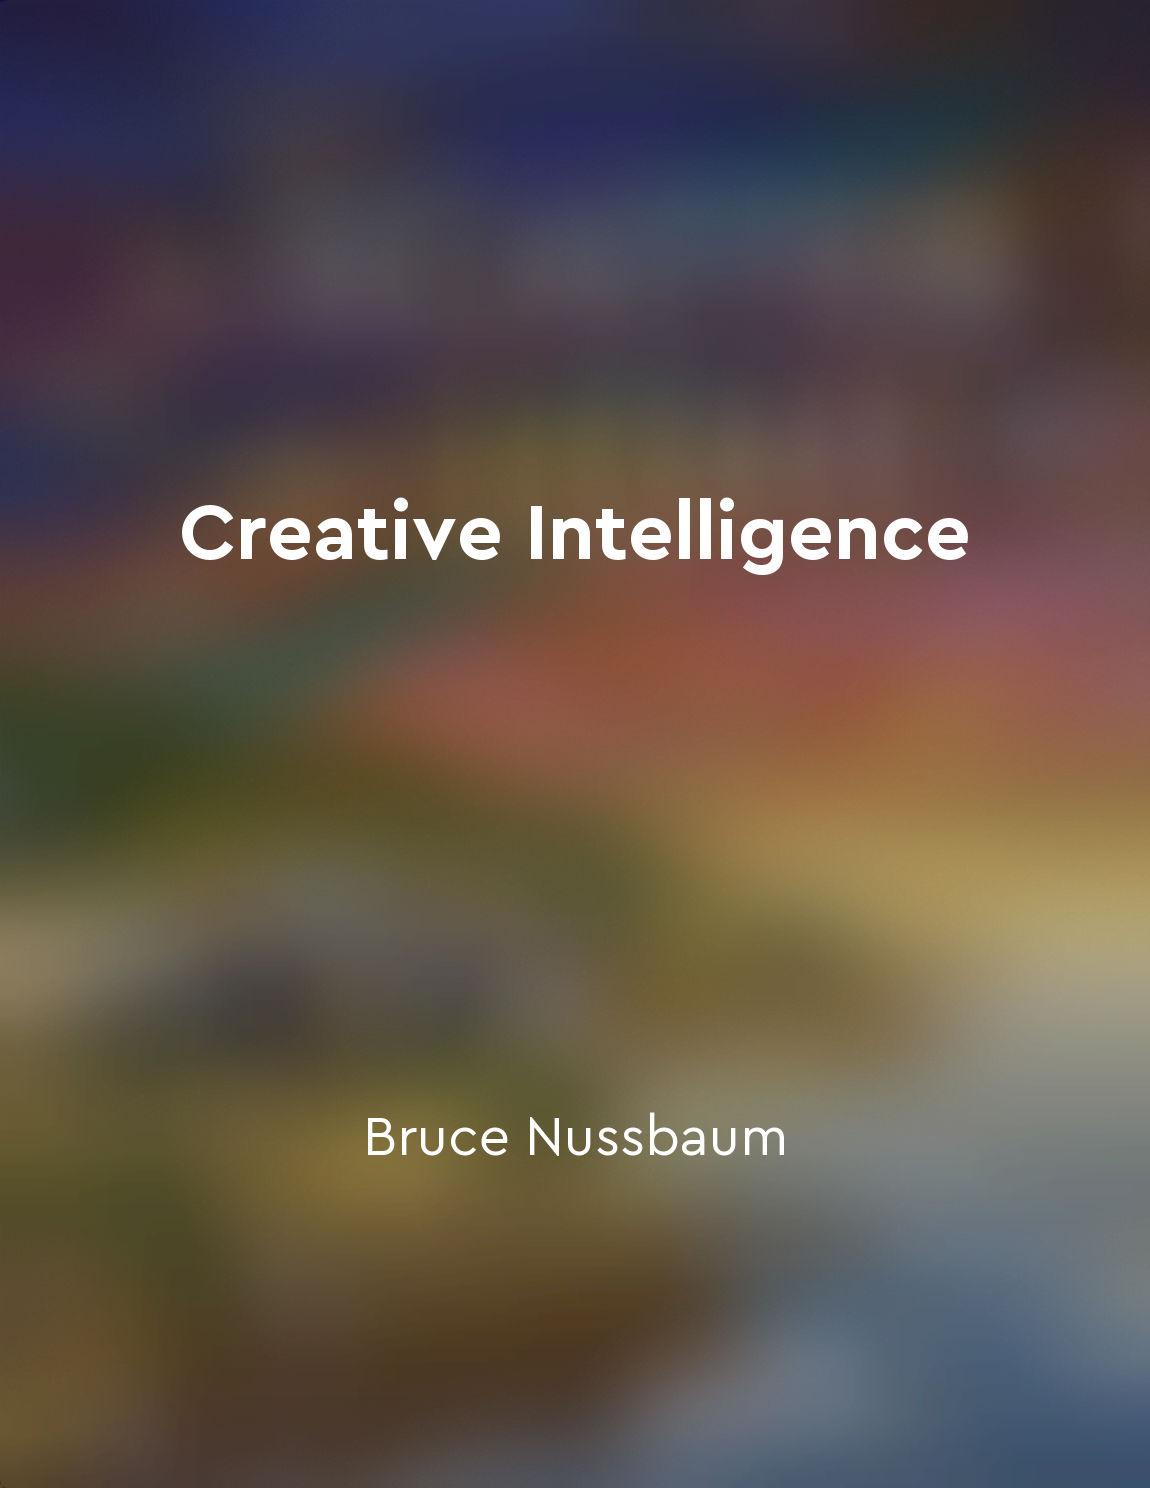 Developing creative intelligence can lead to personal growth